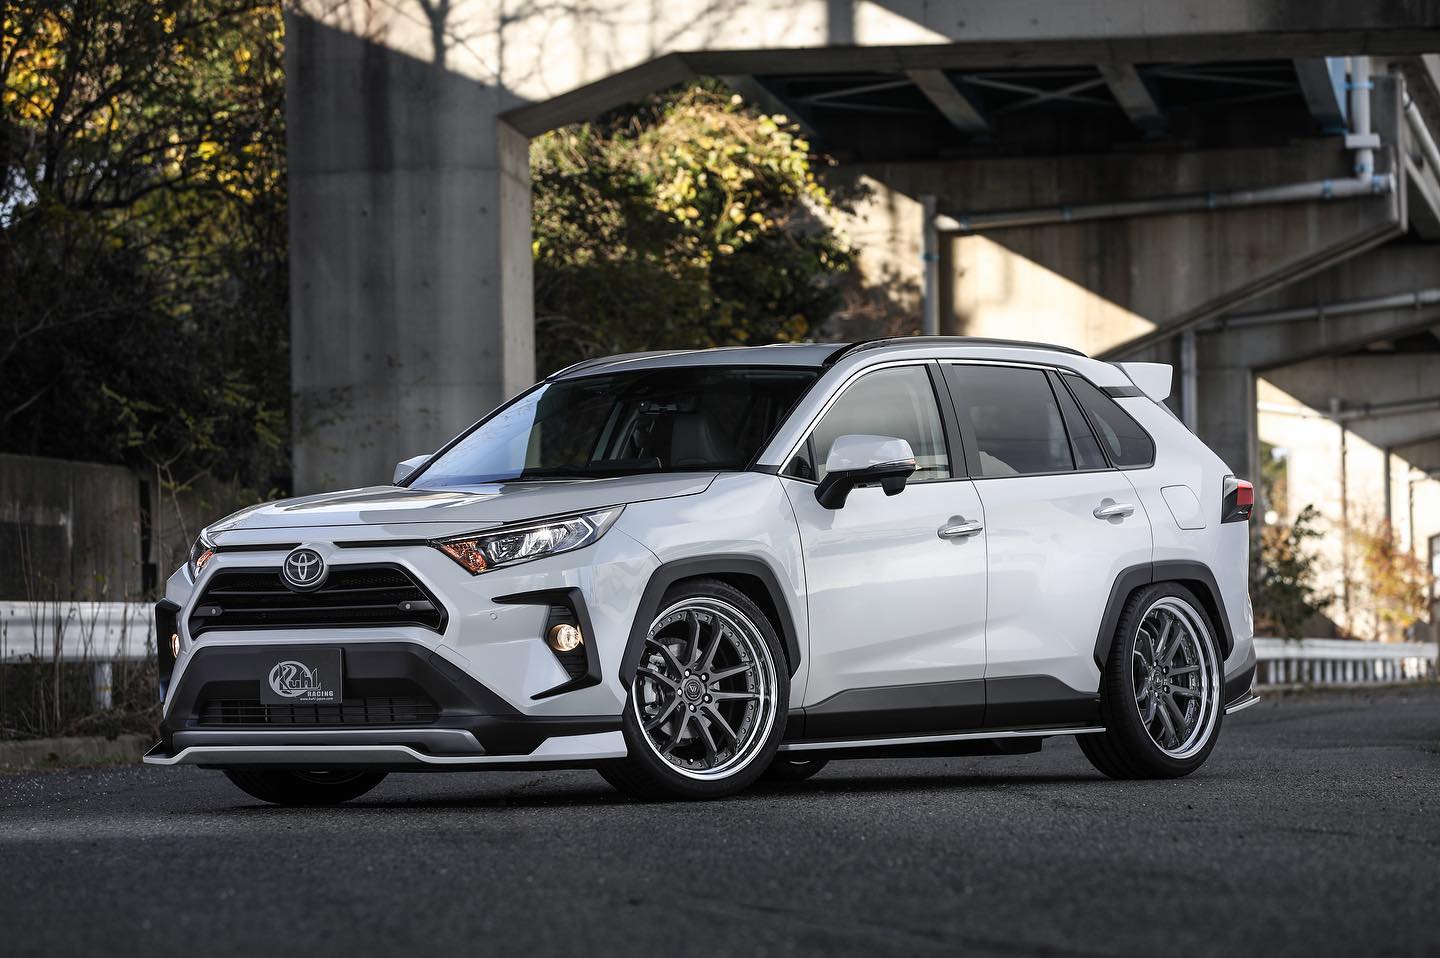 Kuhl Racing Works Up Some Very Cool Looking RAV4s